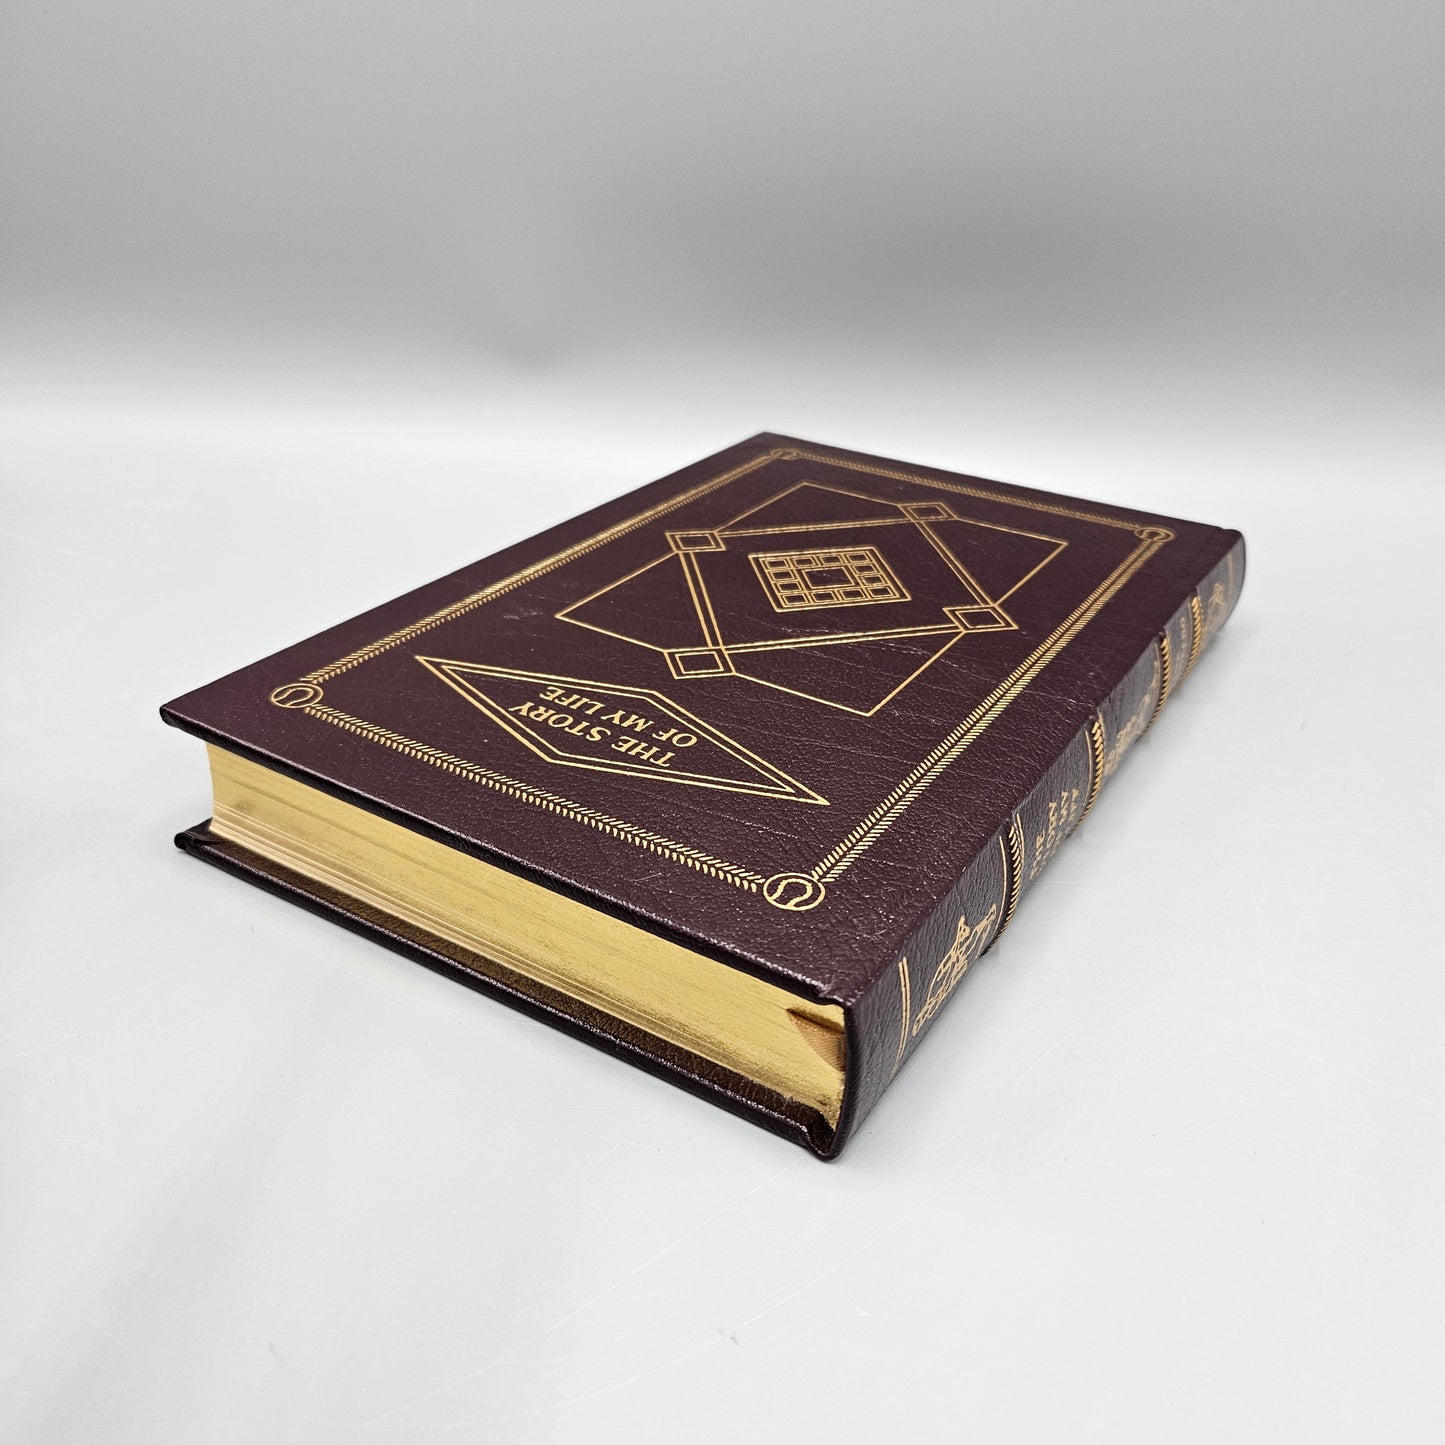 Leatherbound Book - Hank Greenberg "The Story of My Life" Easton Press